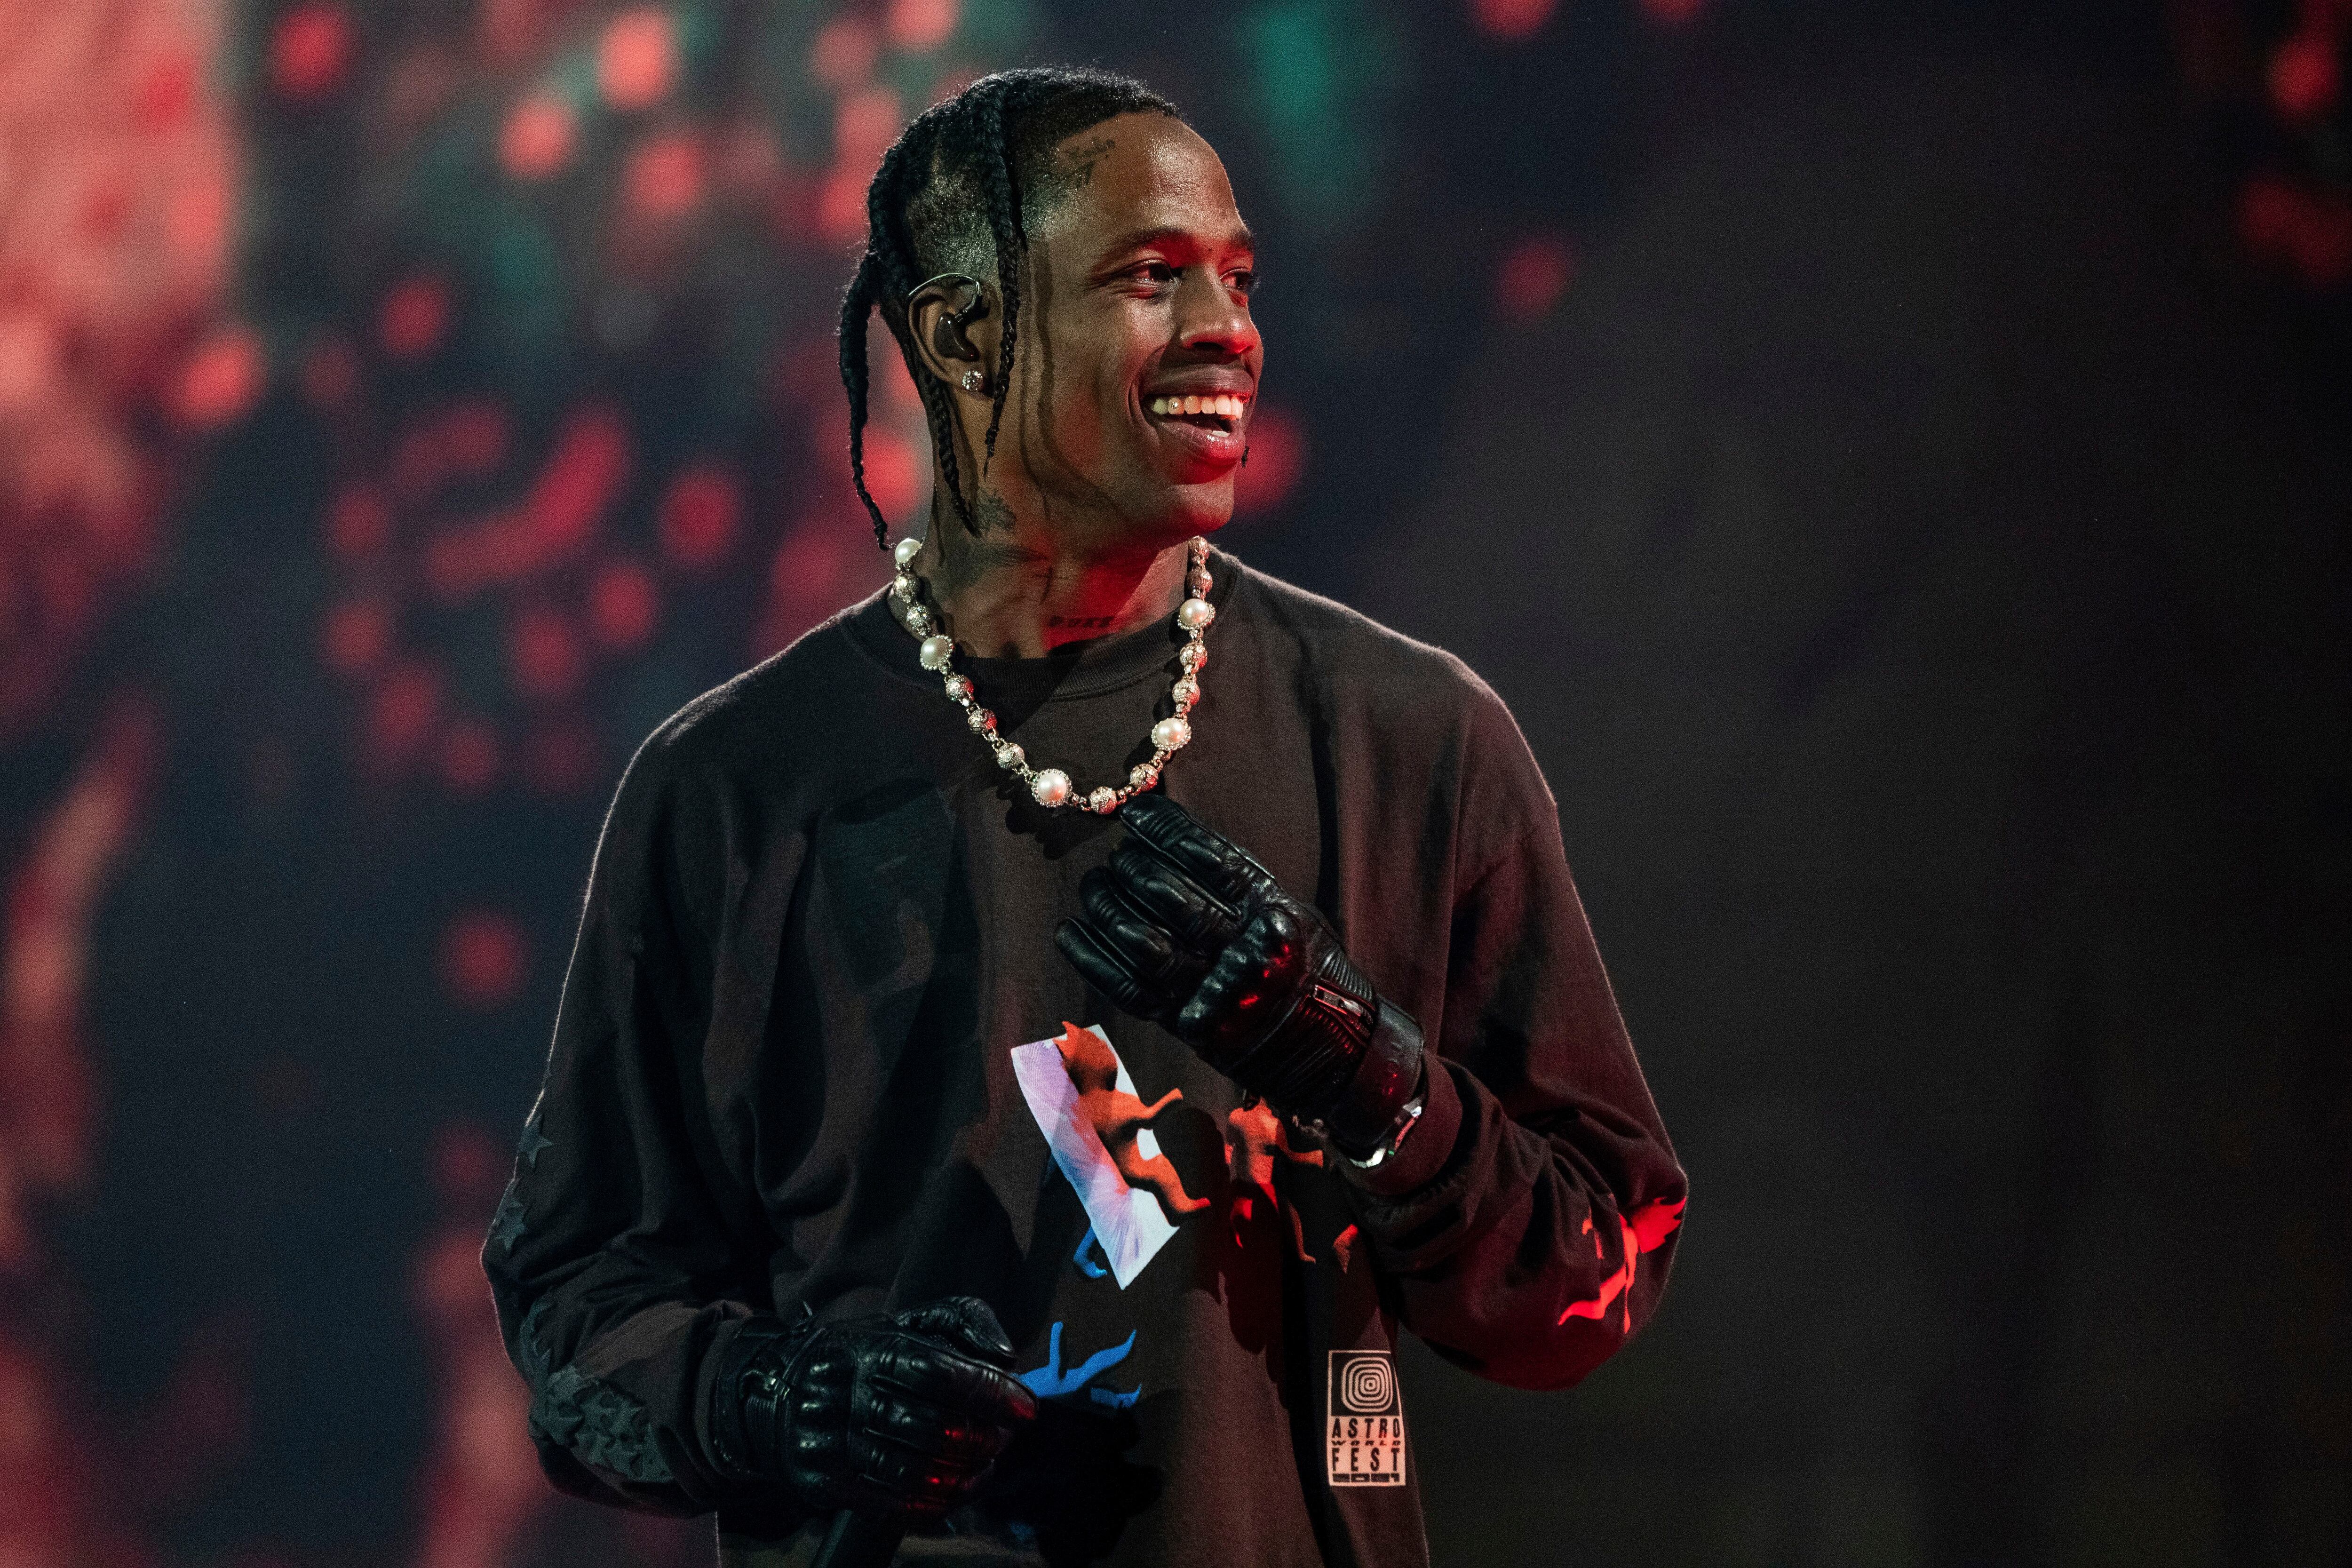 Travis Scott’s shows are fun-filled, high energy and chaotic